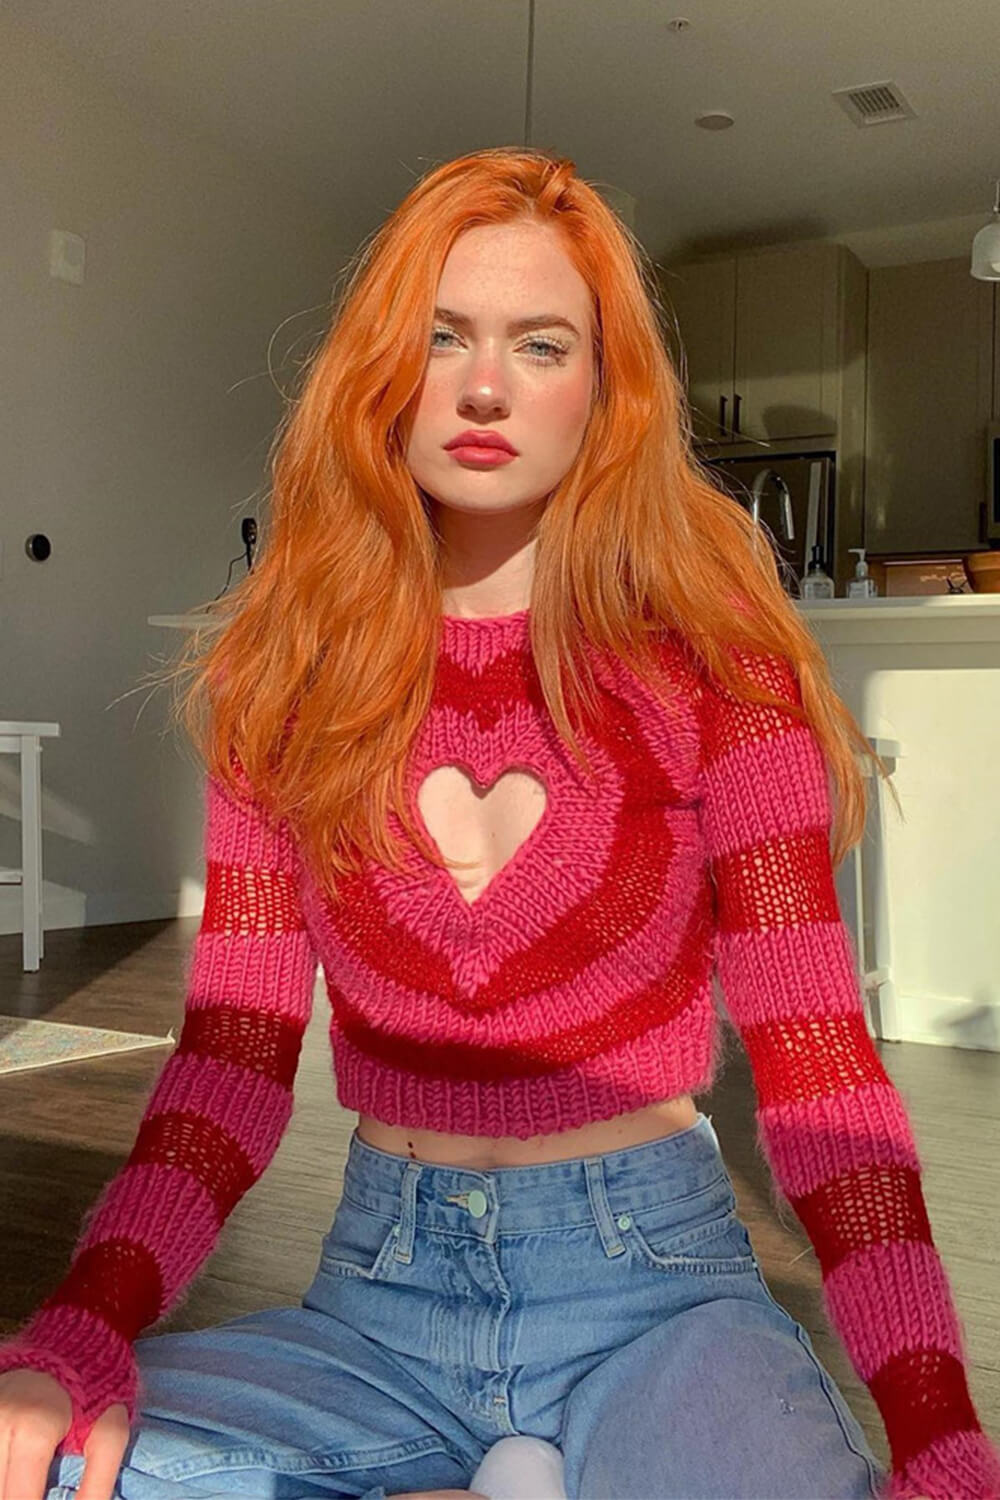 Pink And Red Heart Cut Out Knit Sweater